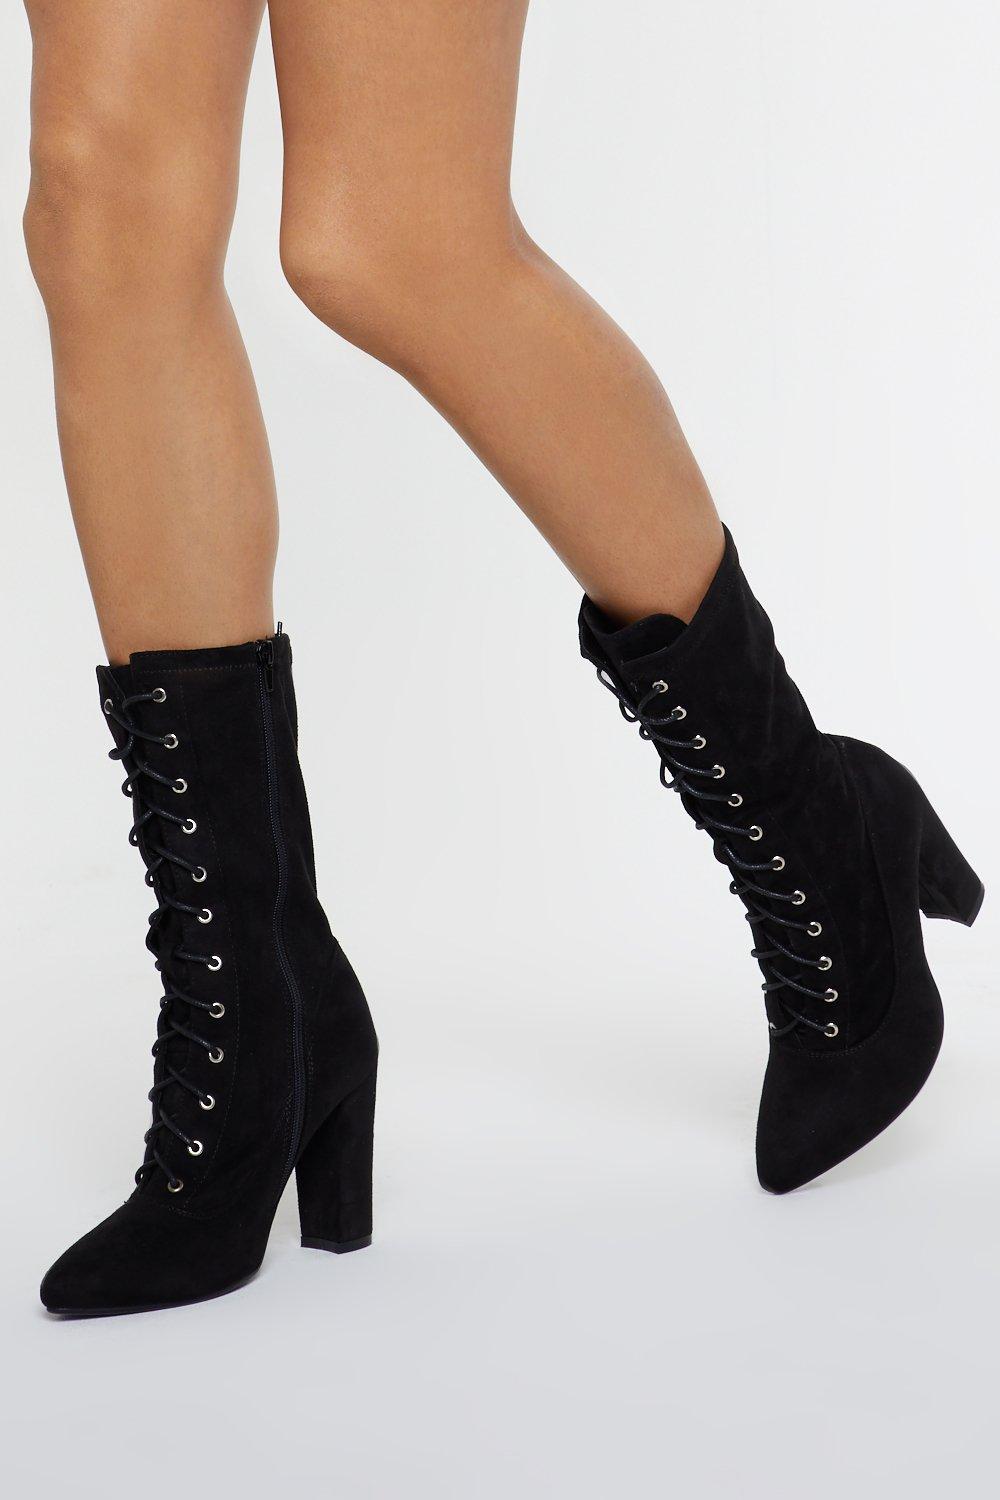 Immi Suede Lace Up Calf Boot | Nasty Gal